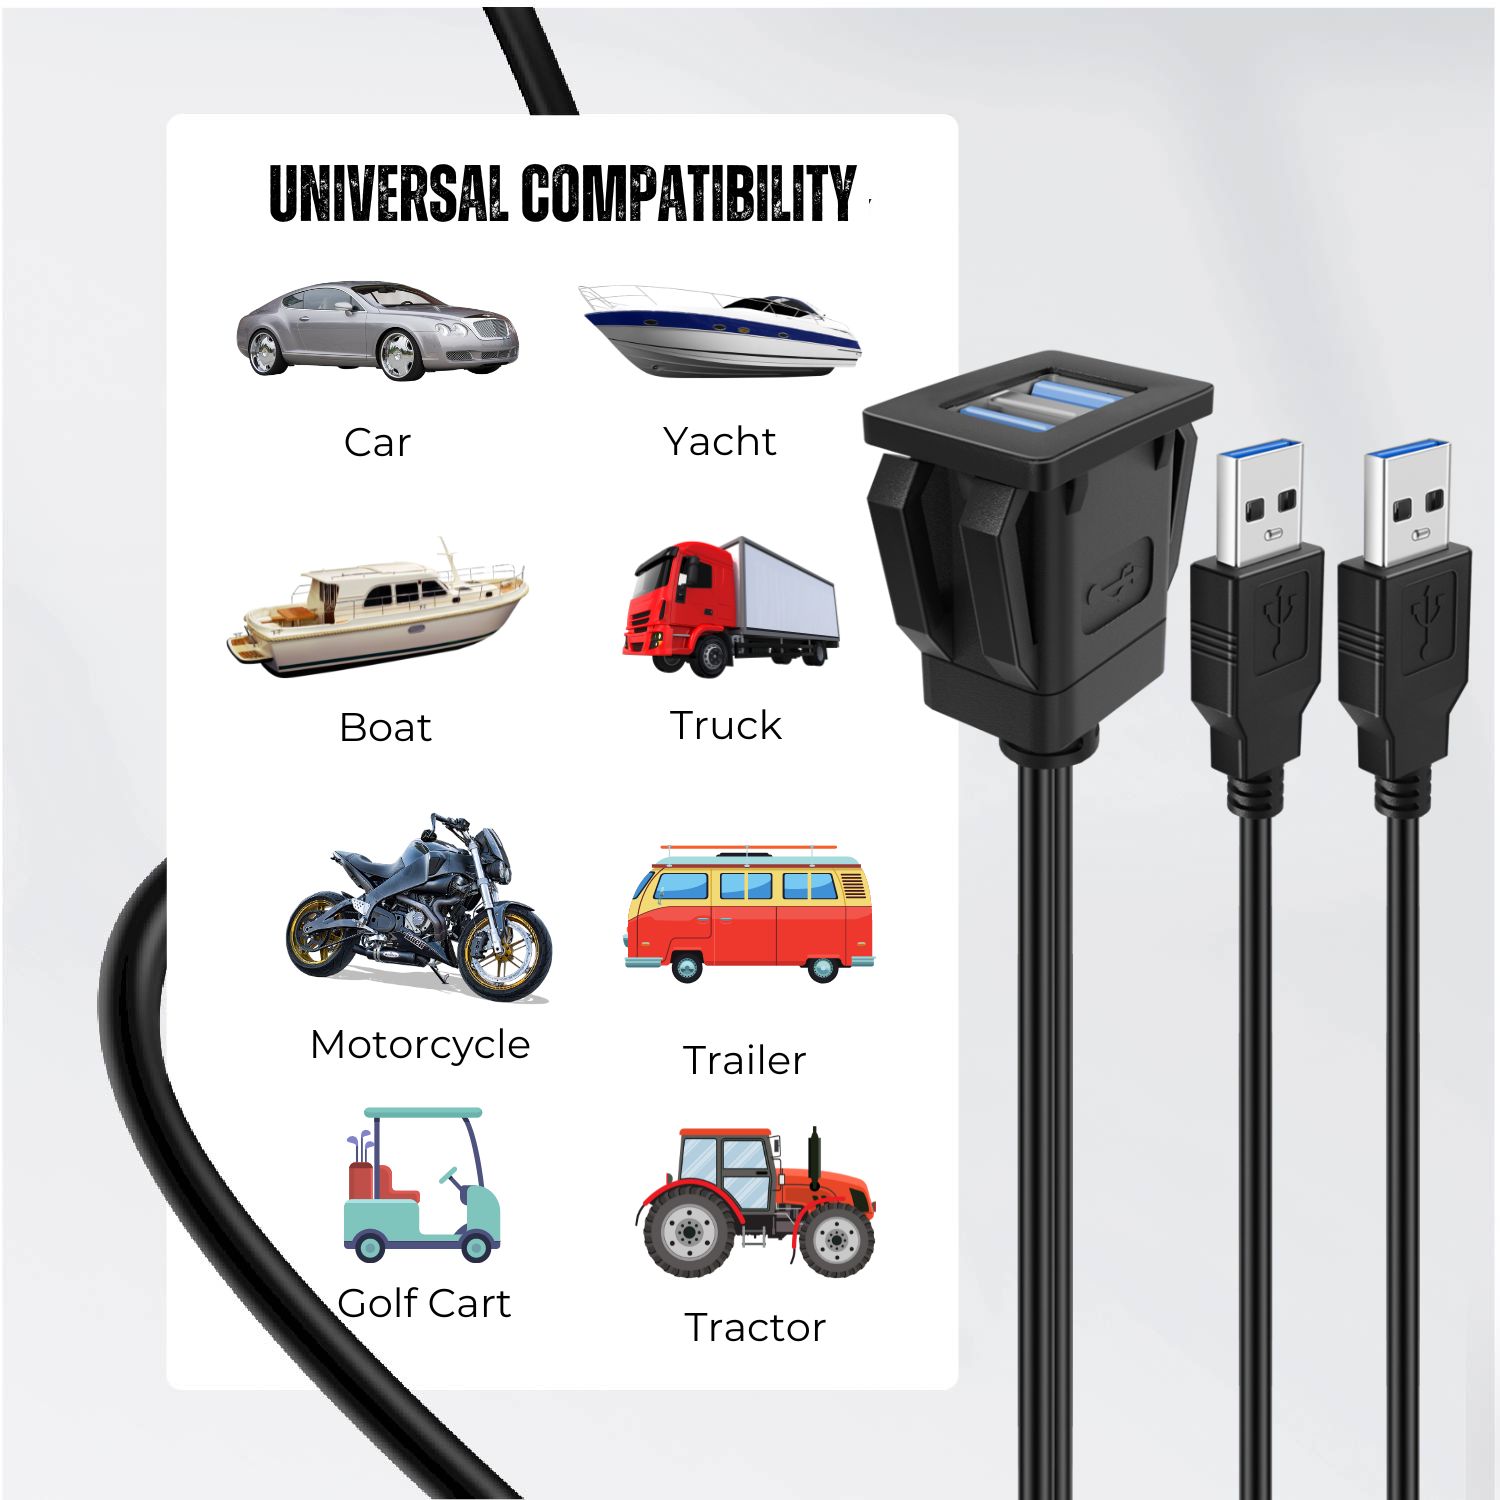 USB 3.0 Flush Mount Cable - Add USB ports to a your car, boat, yacht or other vehicles and devices the way you want; (Note: Please check the length before purchase)